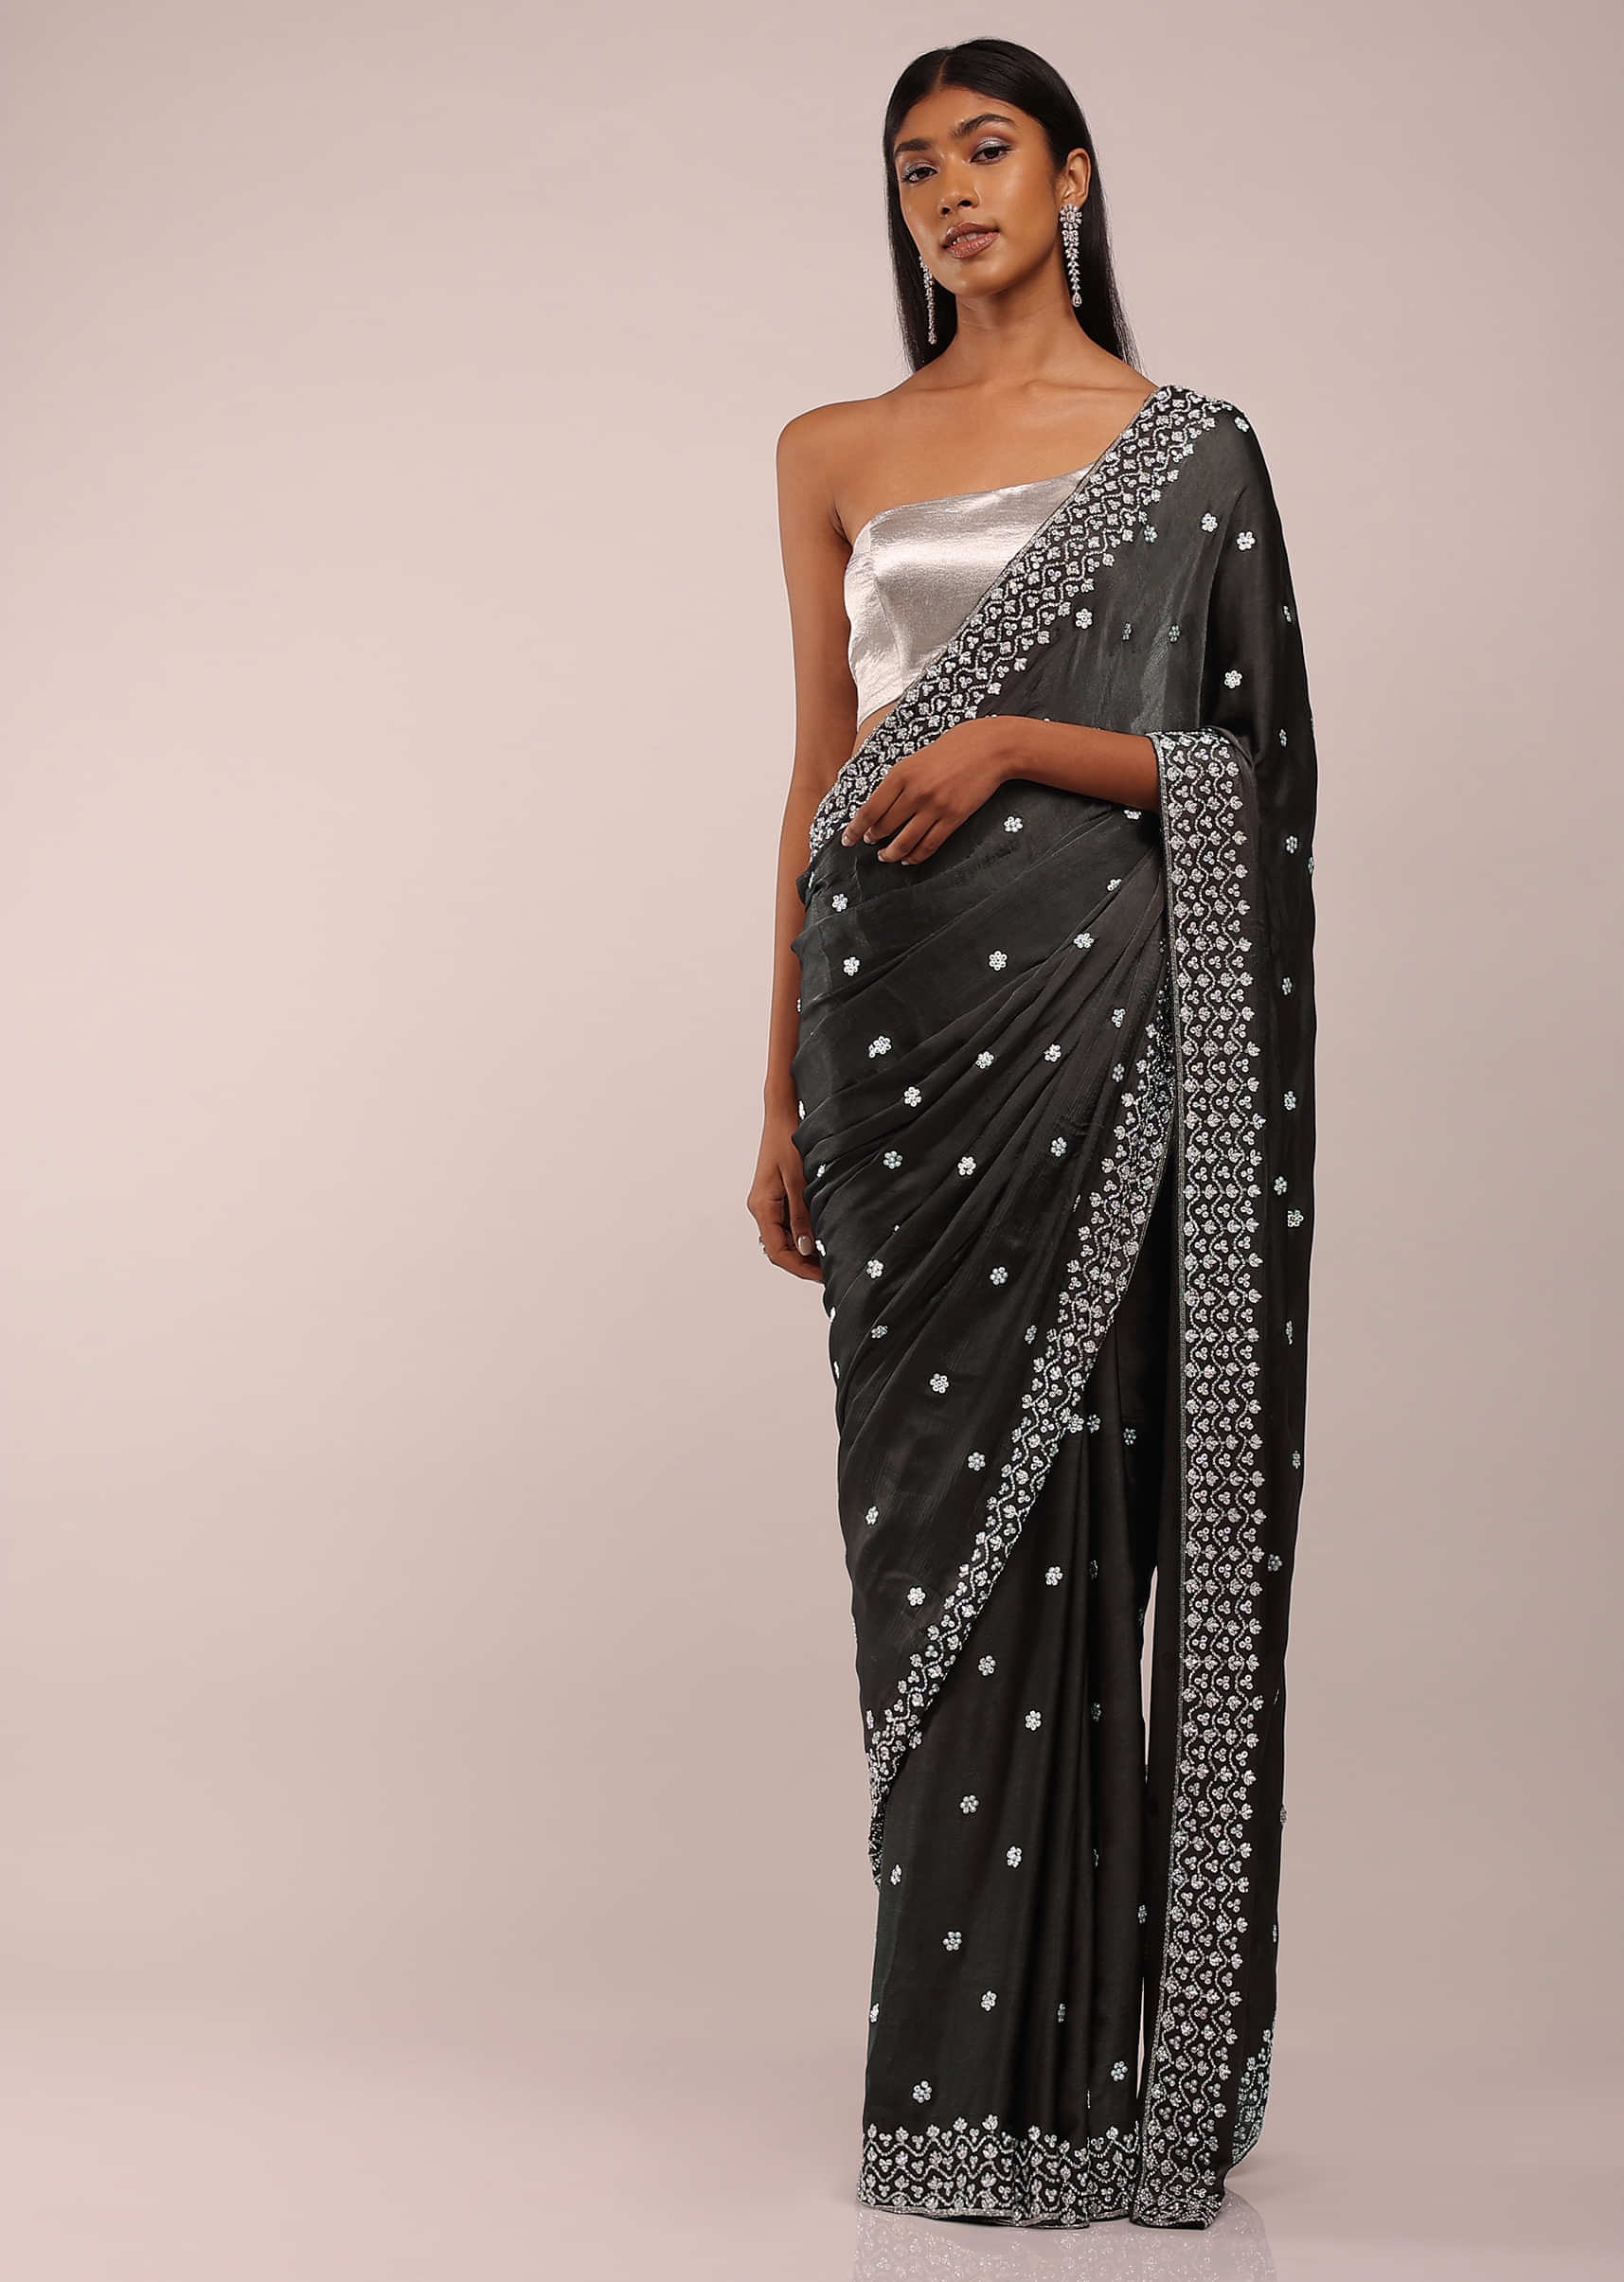 Grey Satin Saree In Silver Petals And Beads Embellishment Buttis With Petal Sequins And Stones On The Border